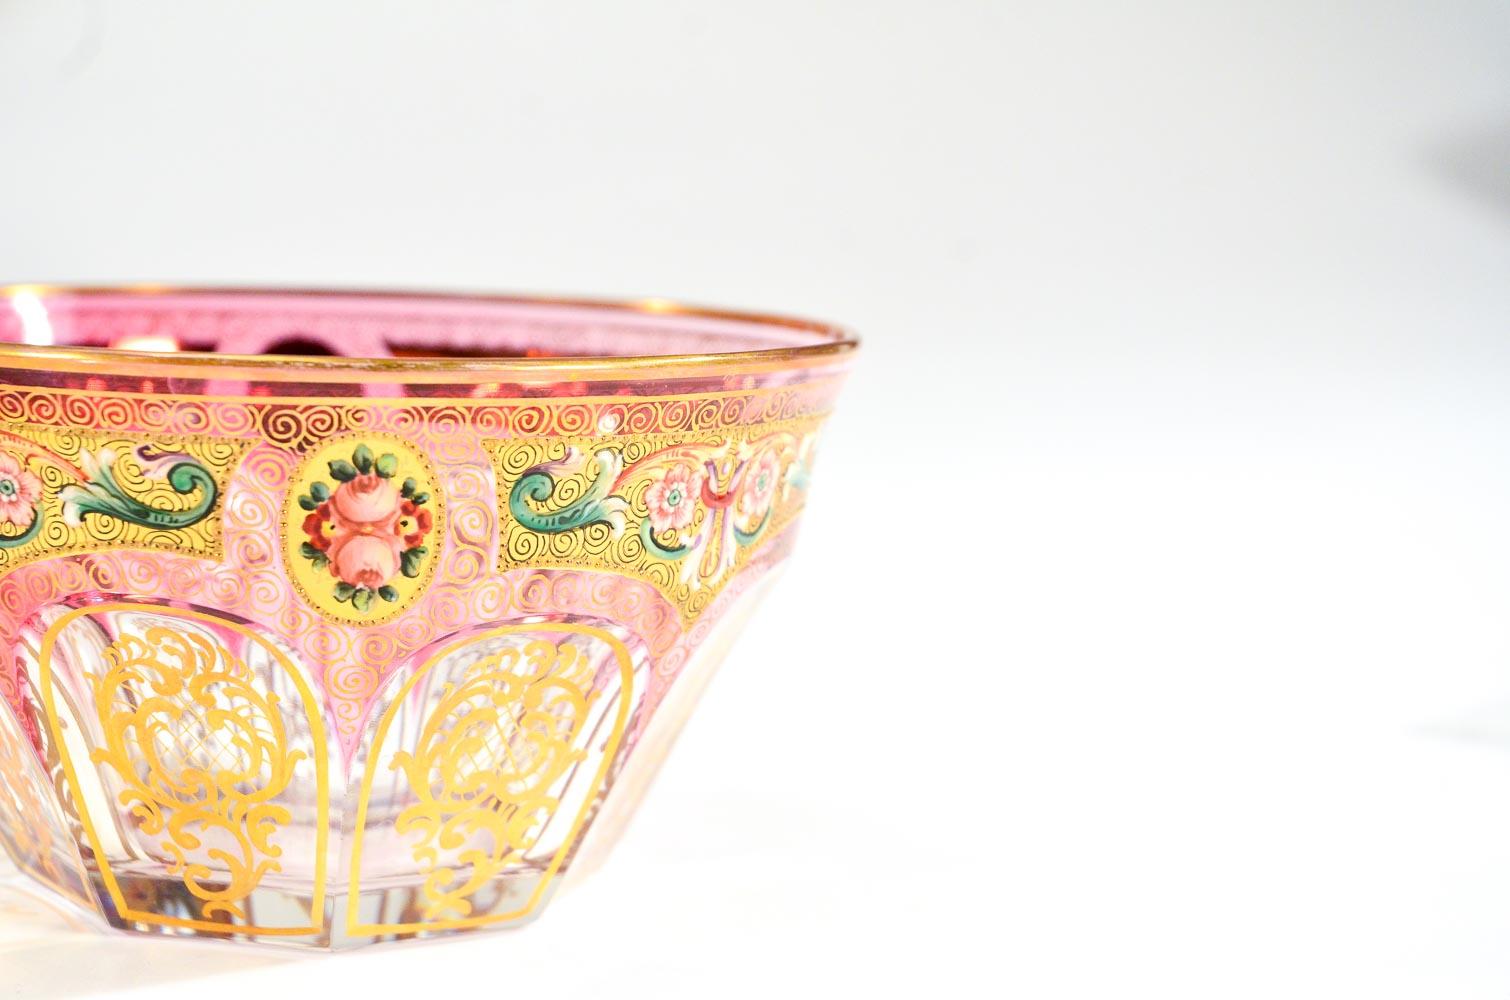 Enameled Set of 12 Baccarat/Moser Crystal Bowls with Hand-Painted Enamel Gilt Decoration